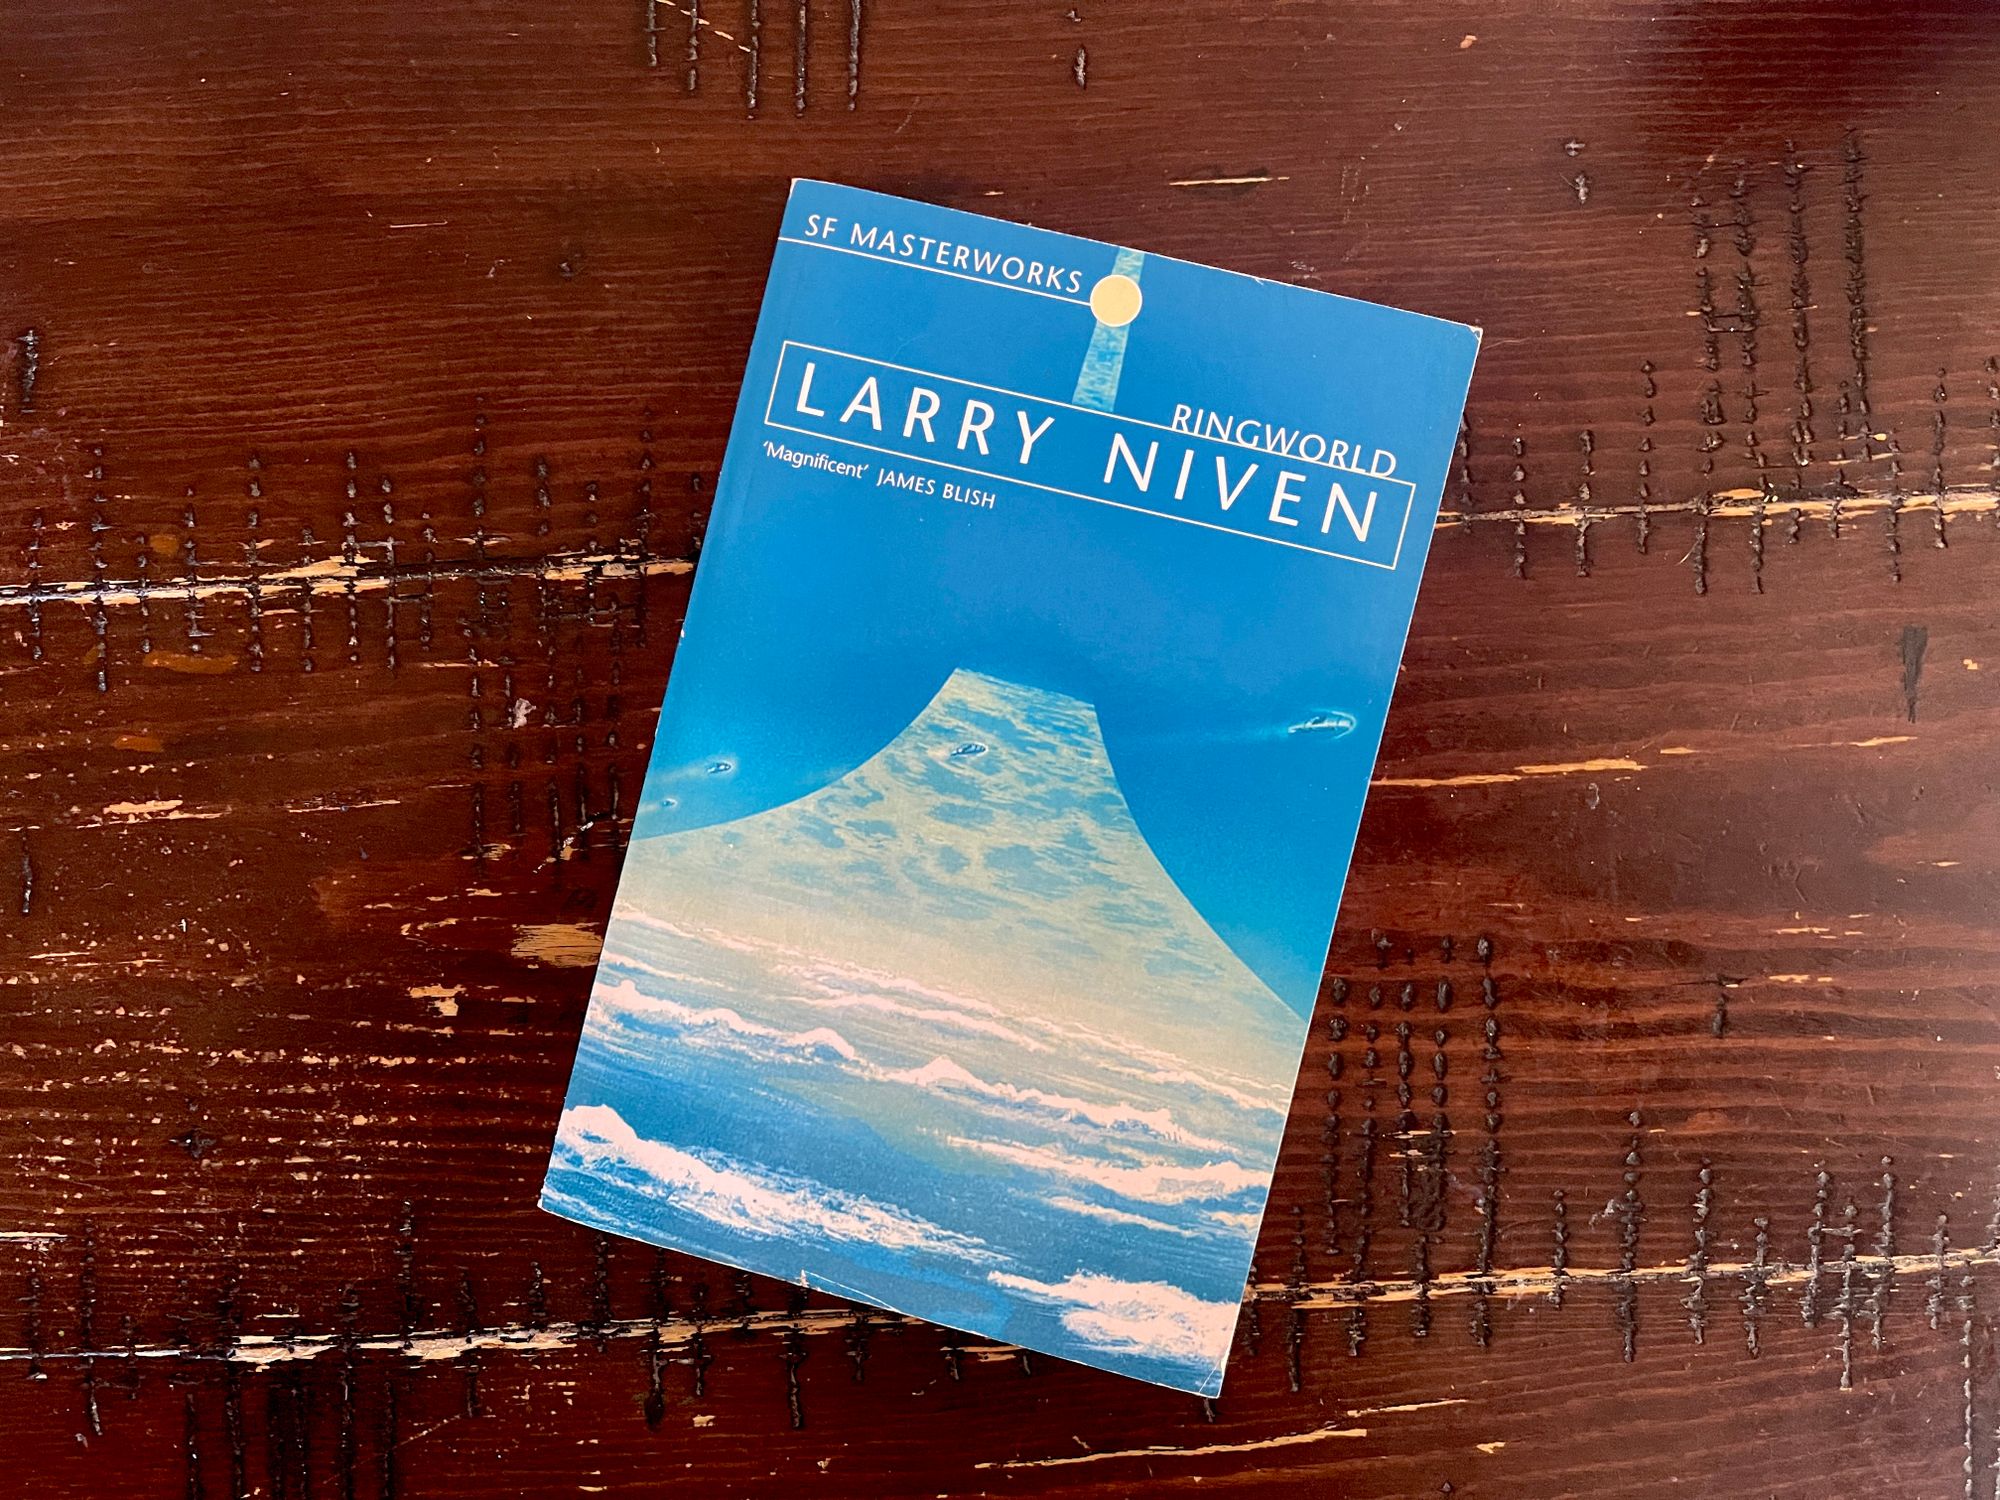 A copy of Larry Niven’s Ringworld book with a blue cover and a strip of a world stretching out from the bottom of the book to the top.